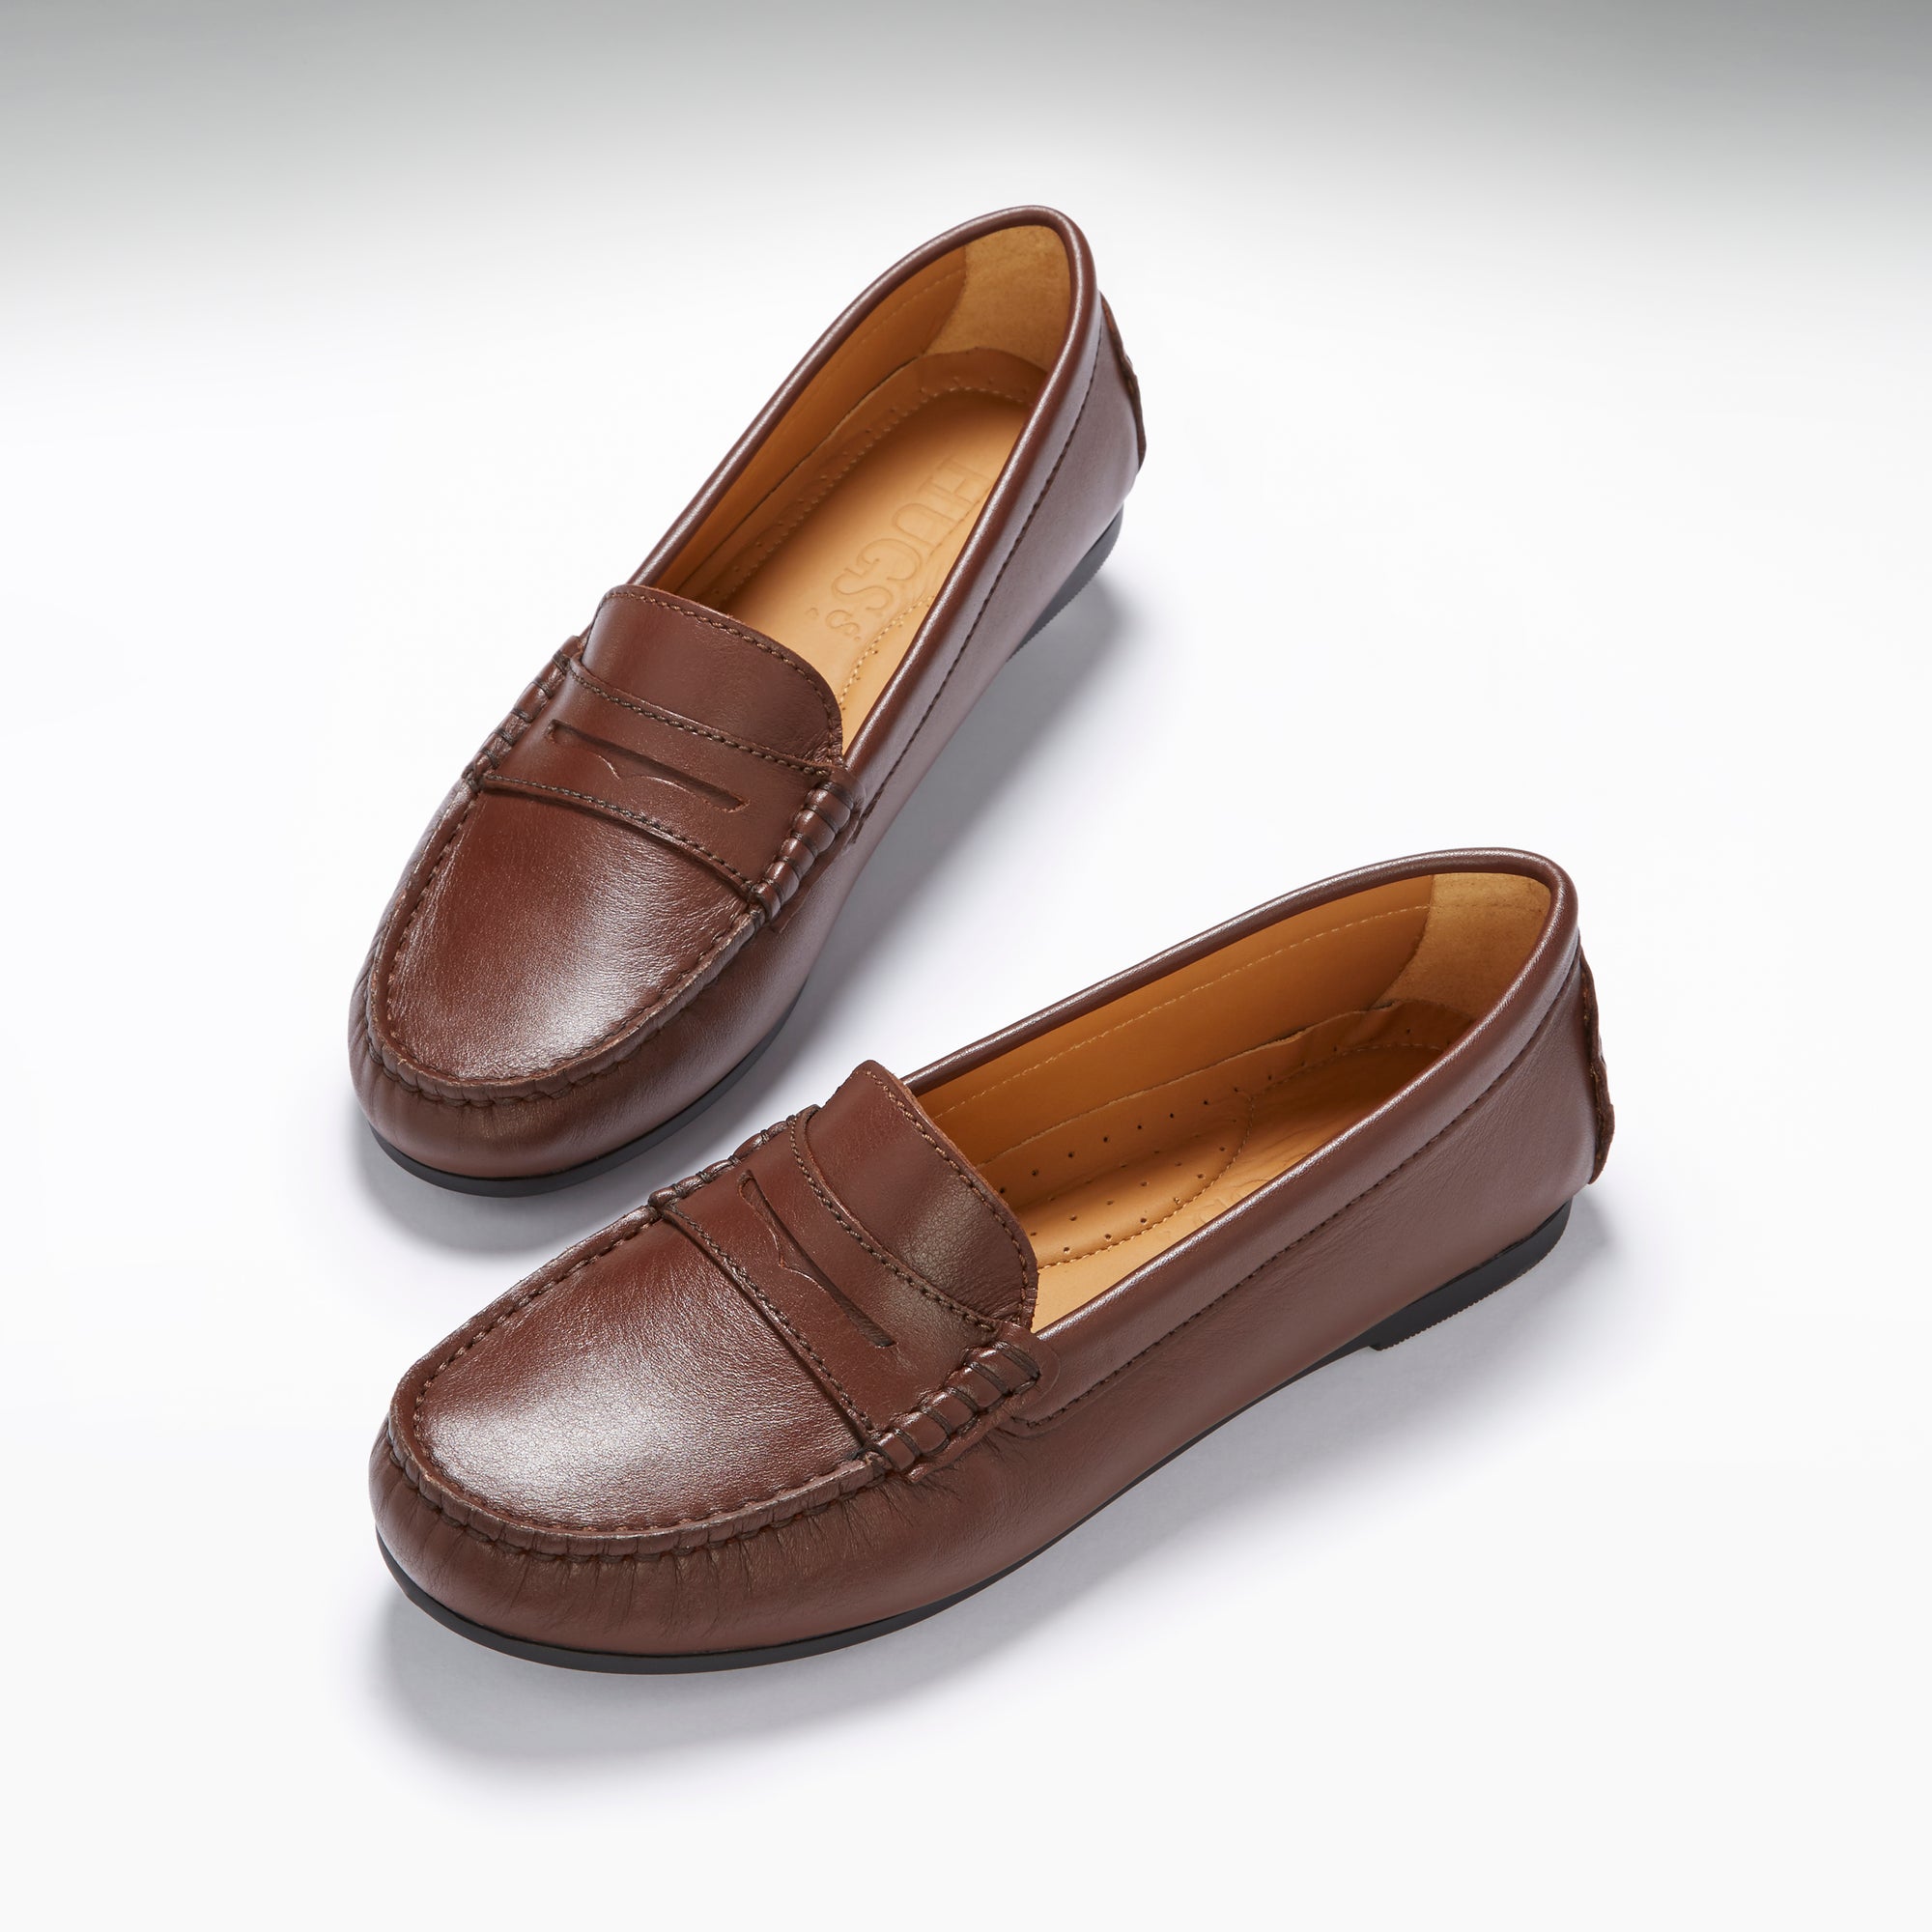 Women's Penny Driving Loafers Full Rubber Sole, brown leather